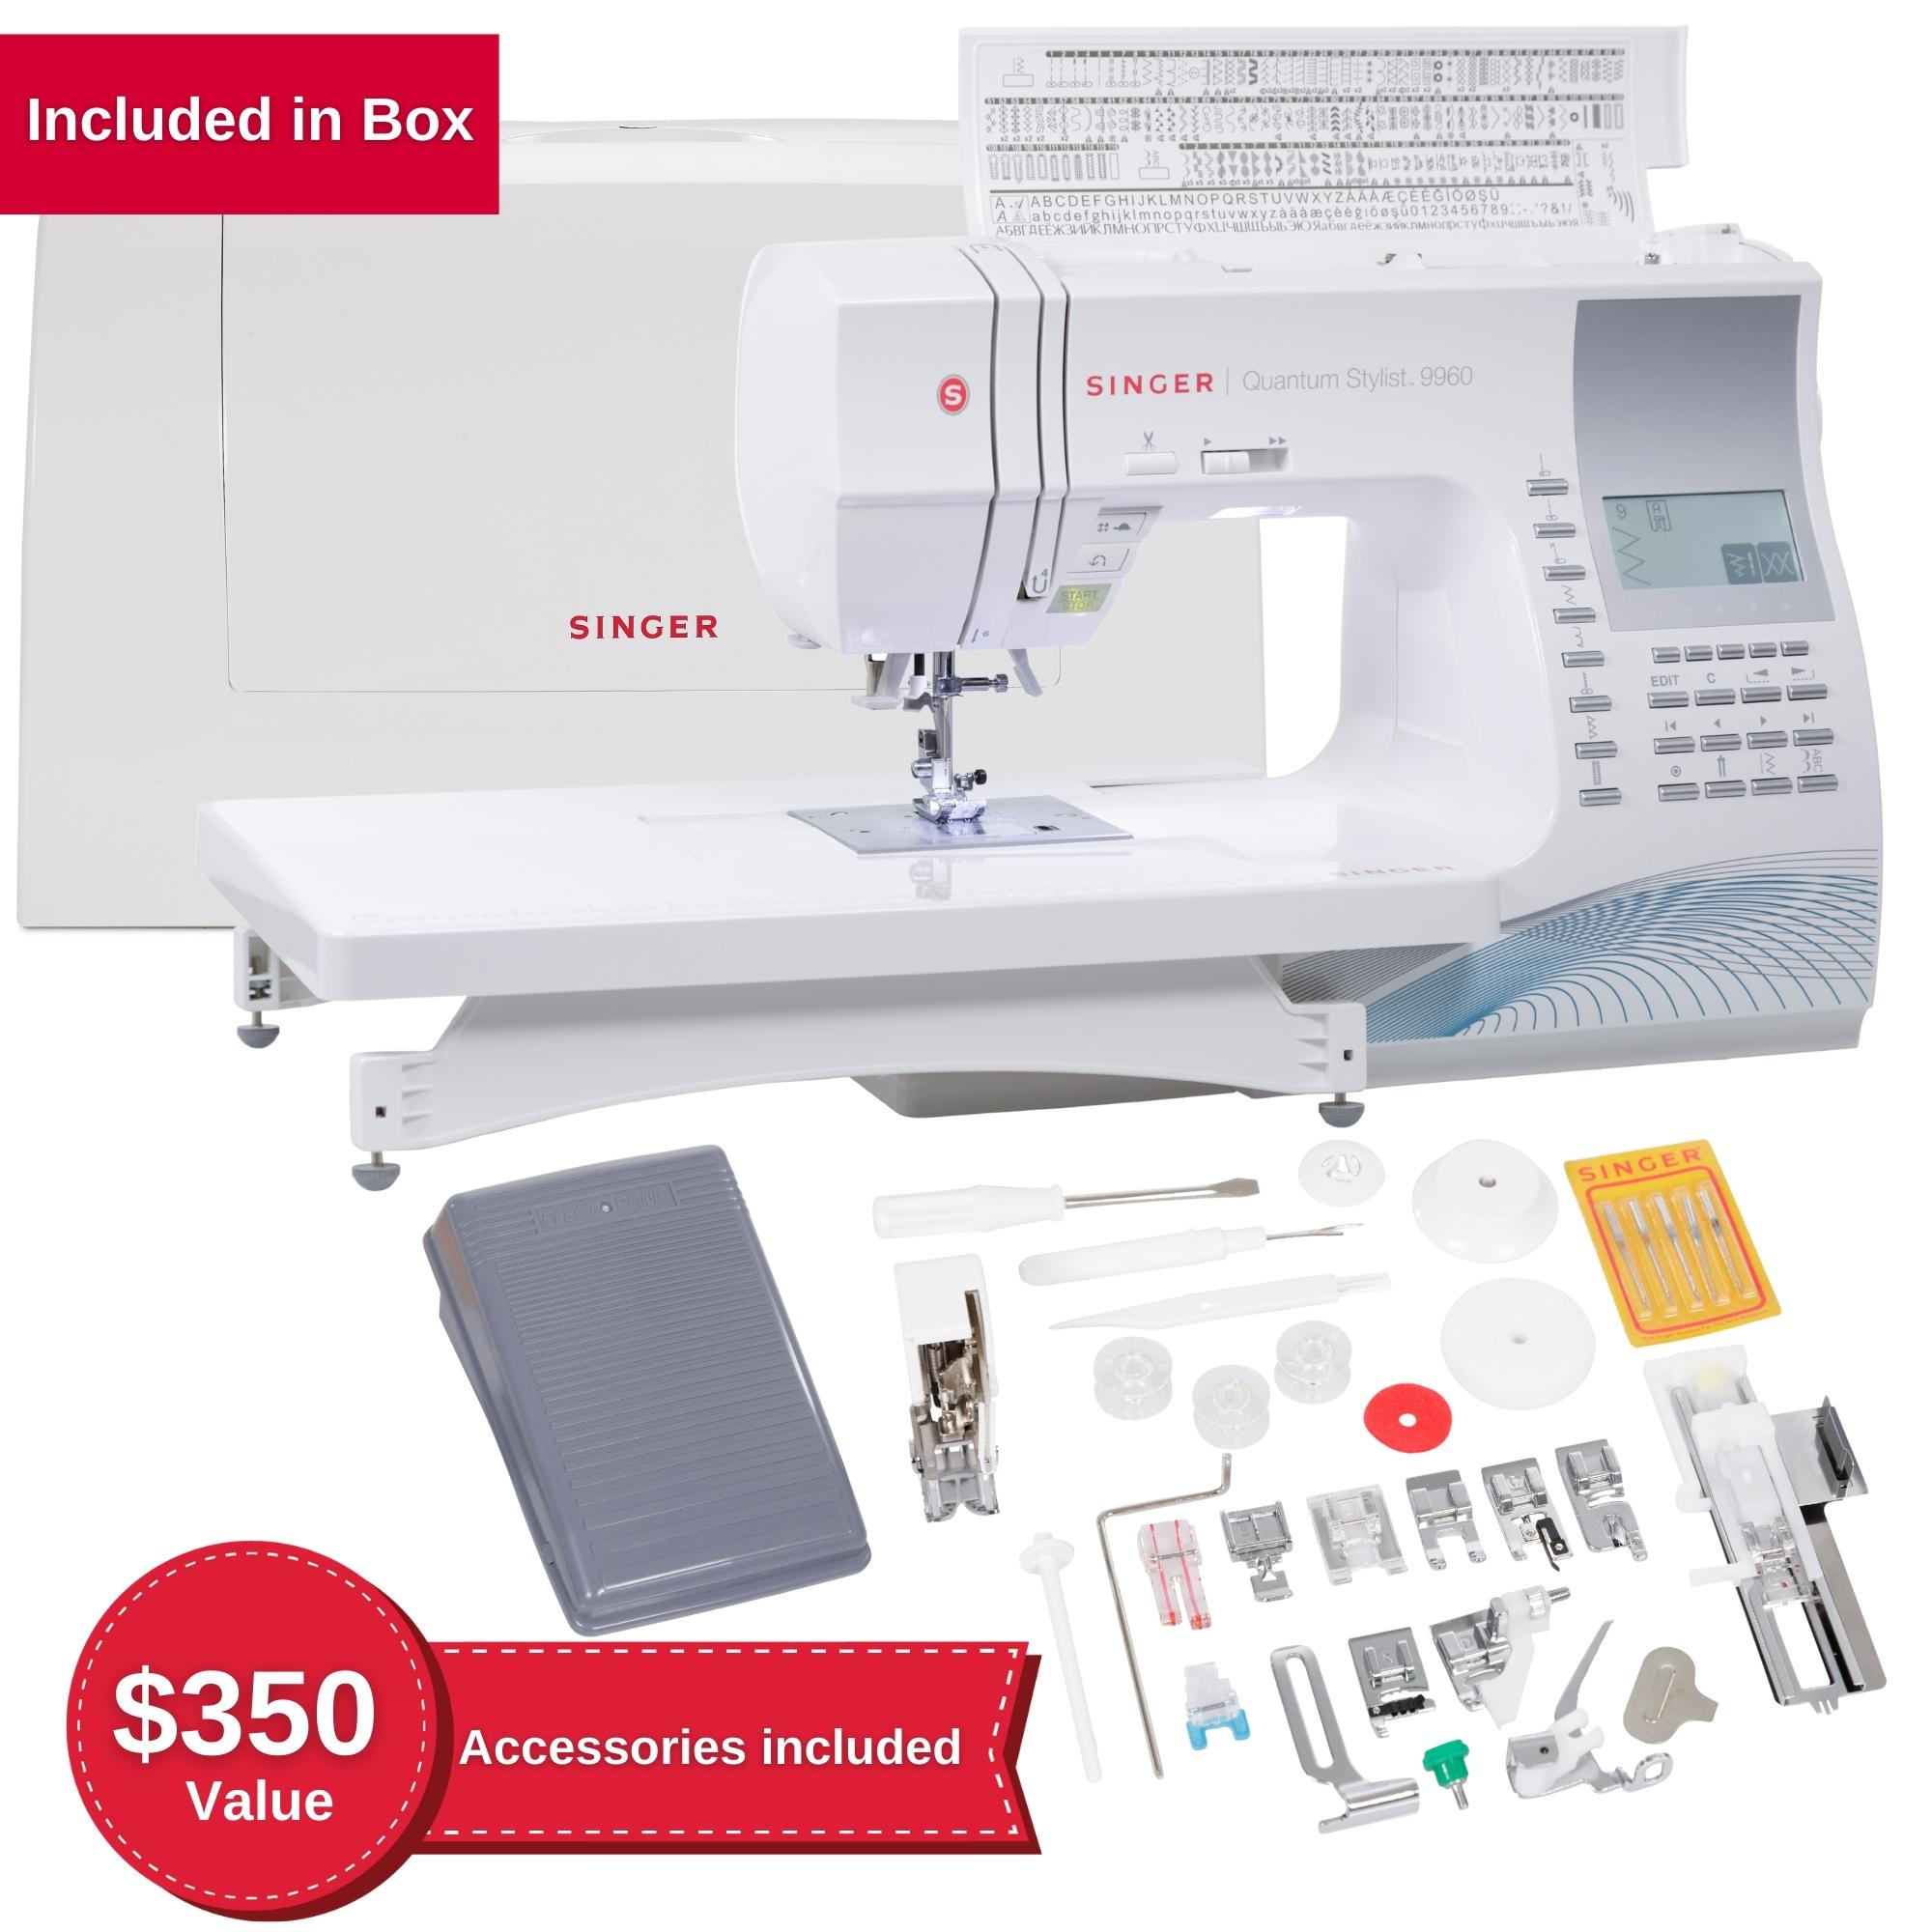 Singer® 9960 Quantum Stylist™ Computerized Sewing Machine With Accessory Kit, Extension Table - 600 Stitches & Electronic Auto Pilot Mode - image 2 of 12